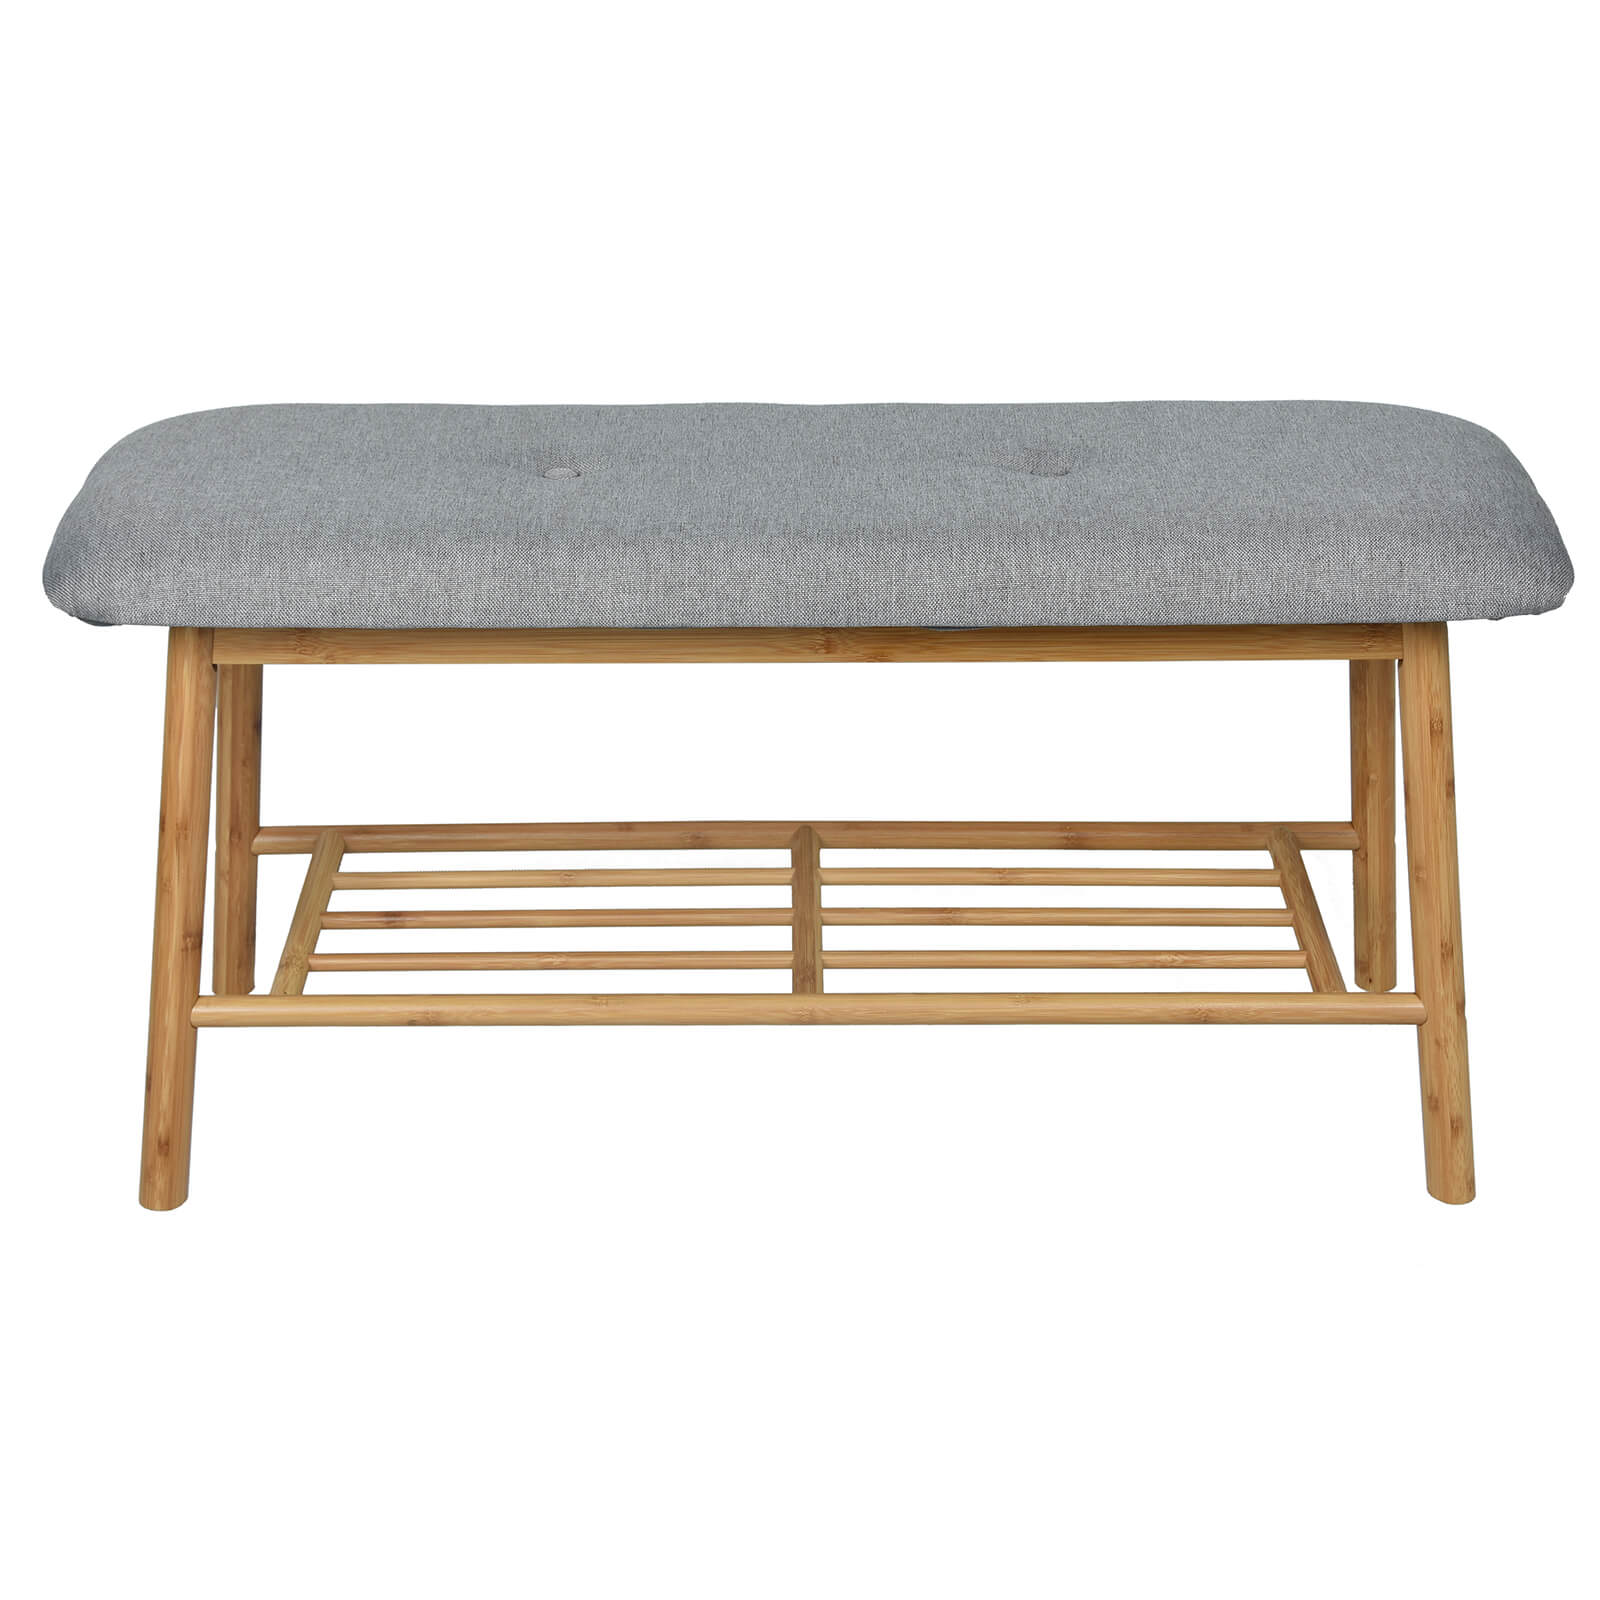 Photo of Bamboo Shoe Bench With Grey Cushion Seat